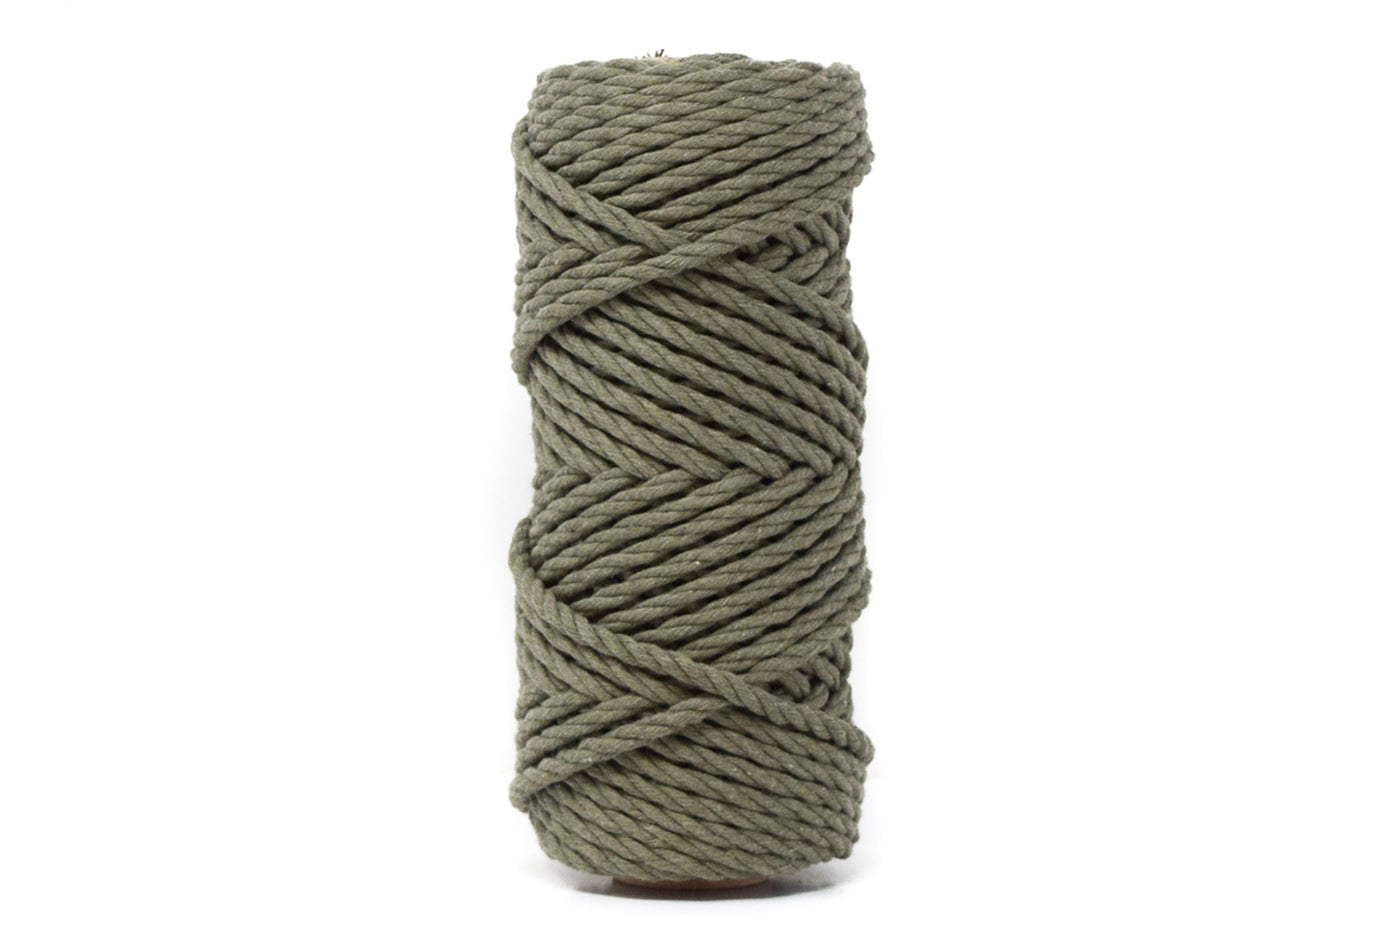 COTTON ROPE ZERO WASTE 5 MM - 3 PLY - BAY LEAF COLOR